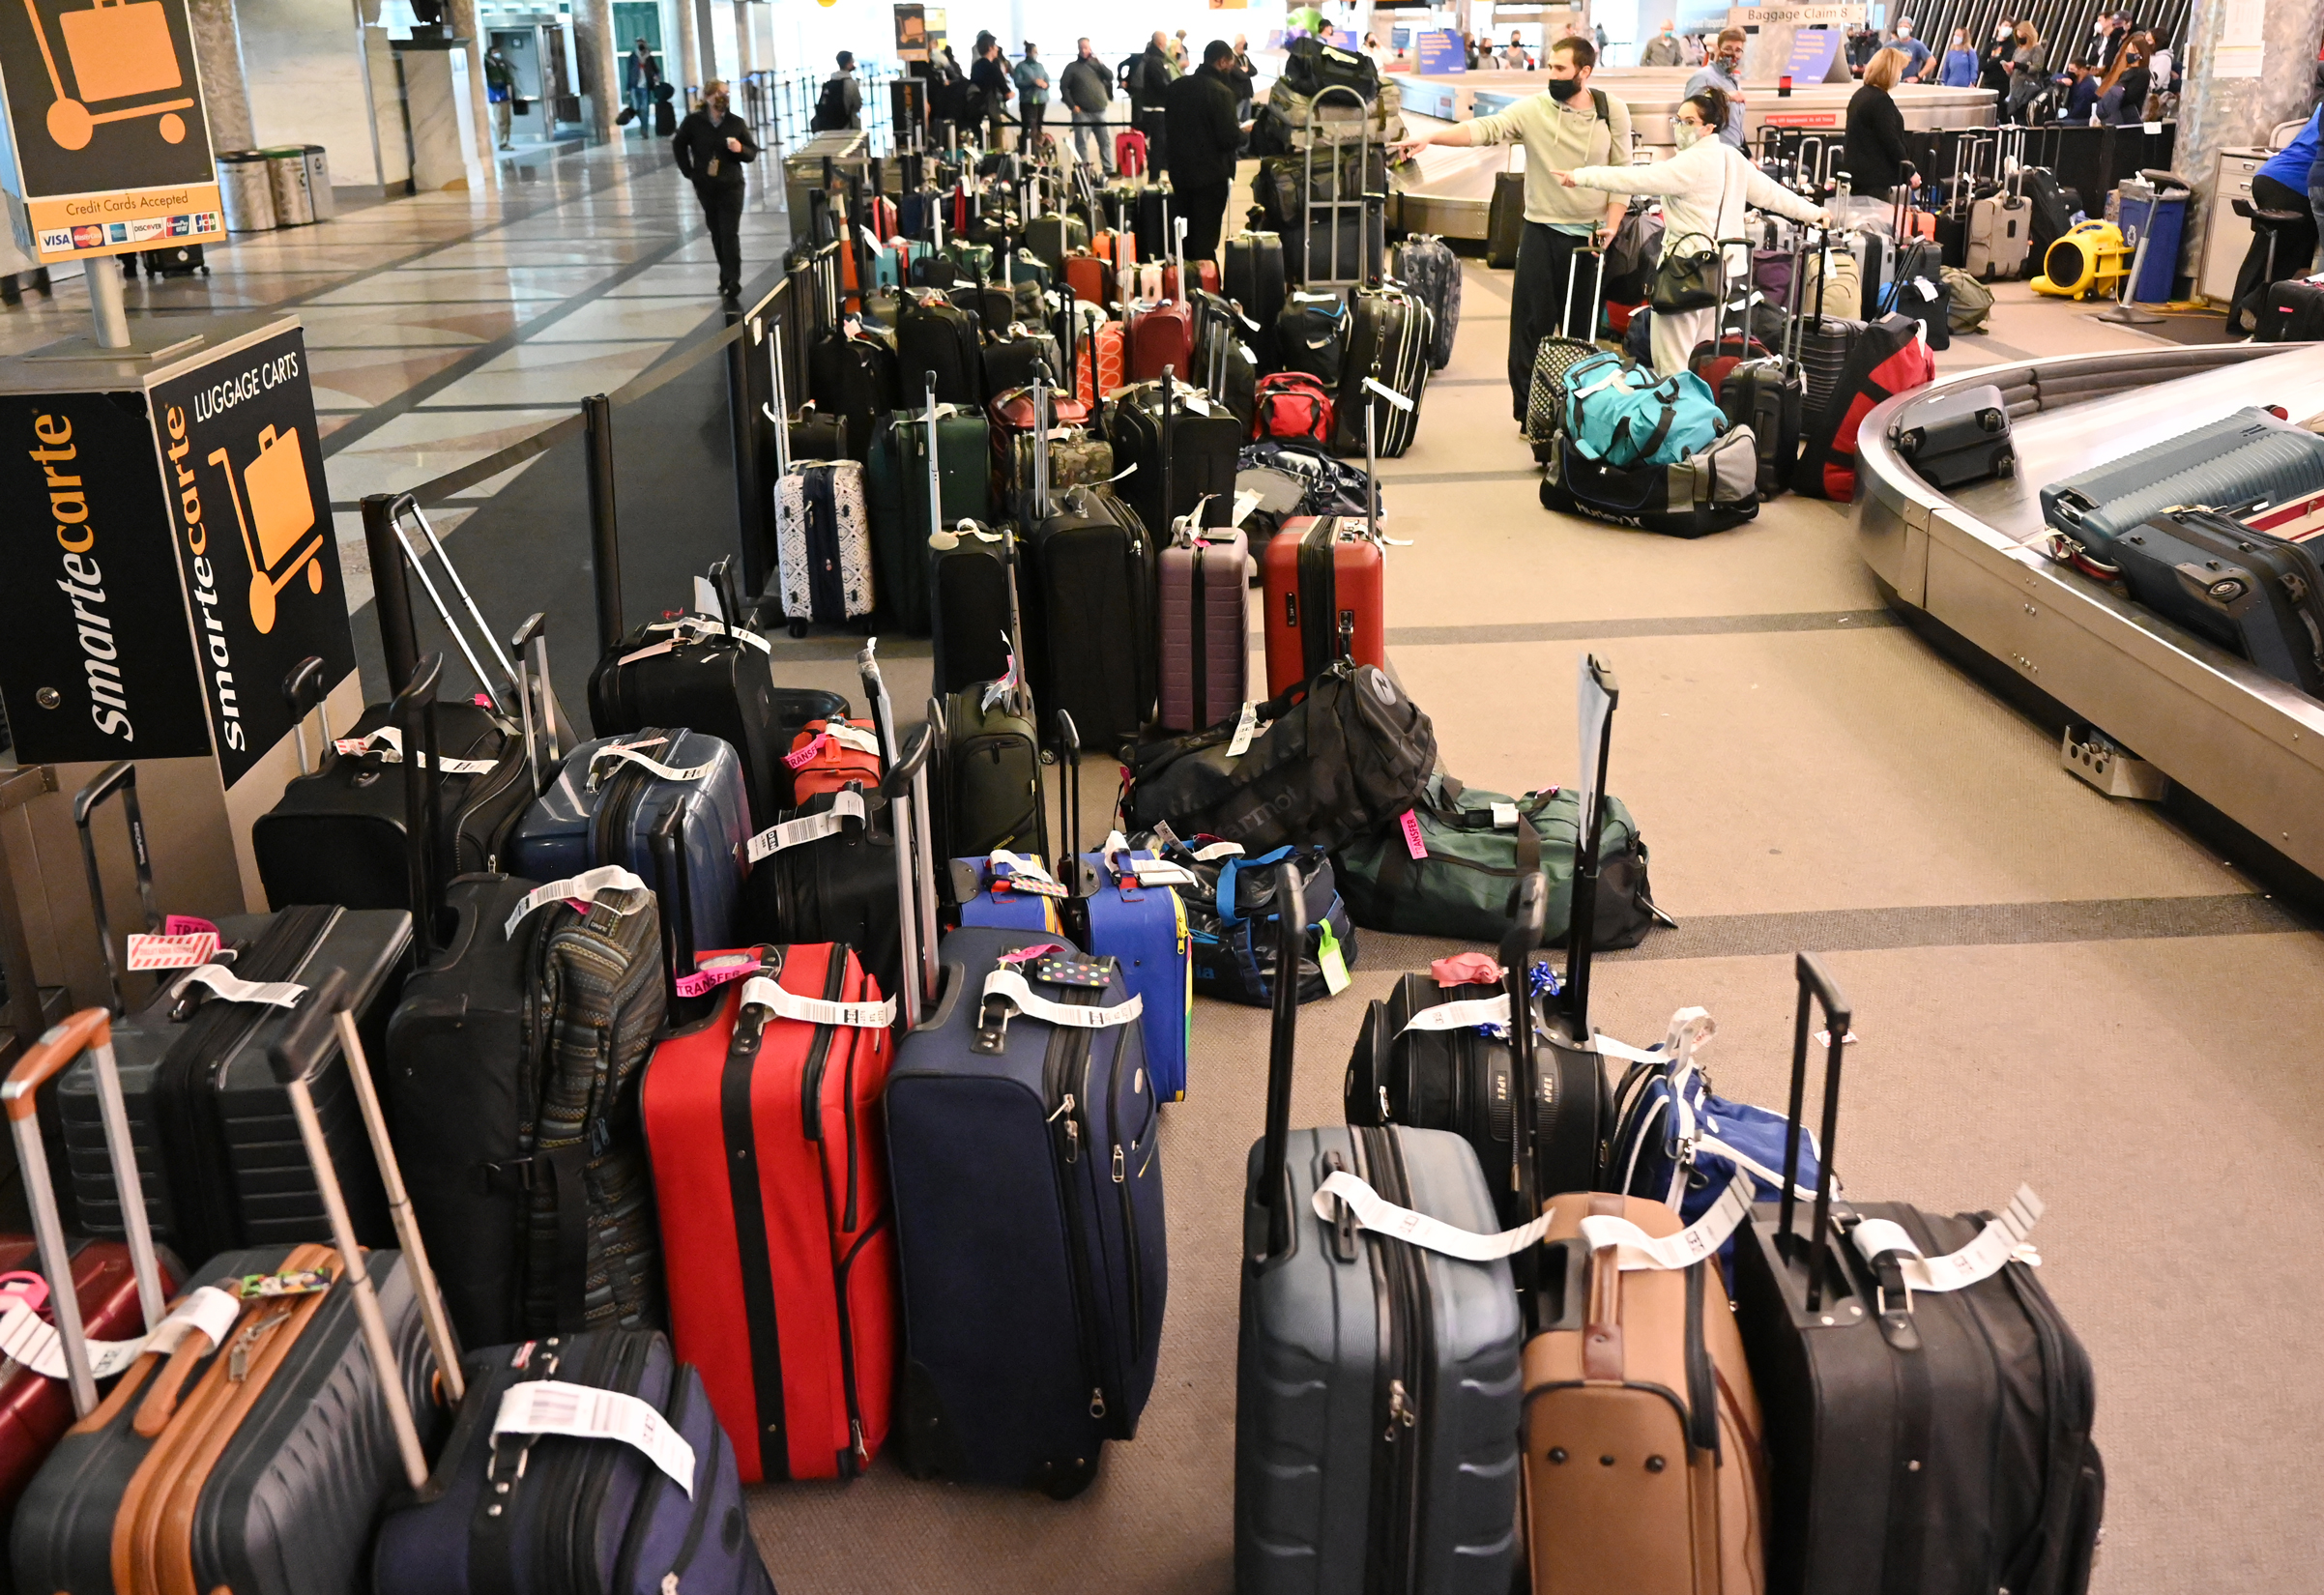 Unclaimed baggage starts to pile up outside the Southwest Airlines baggage claim at Denver International Airport on Monday, January 3.